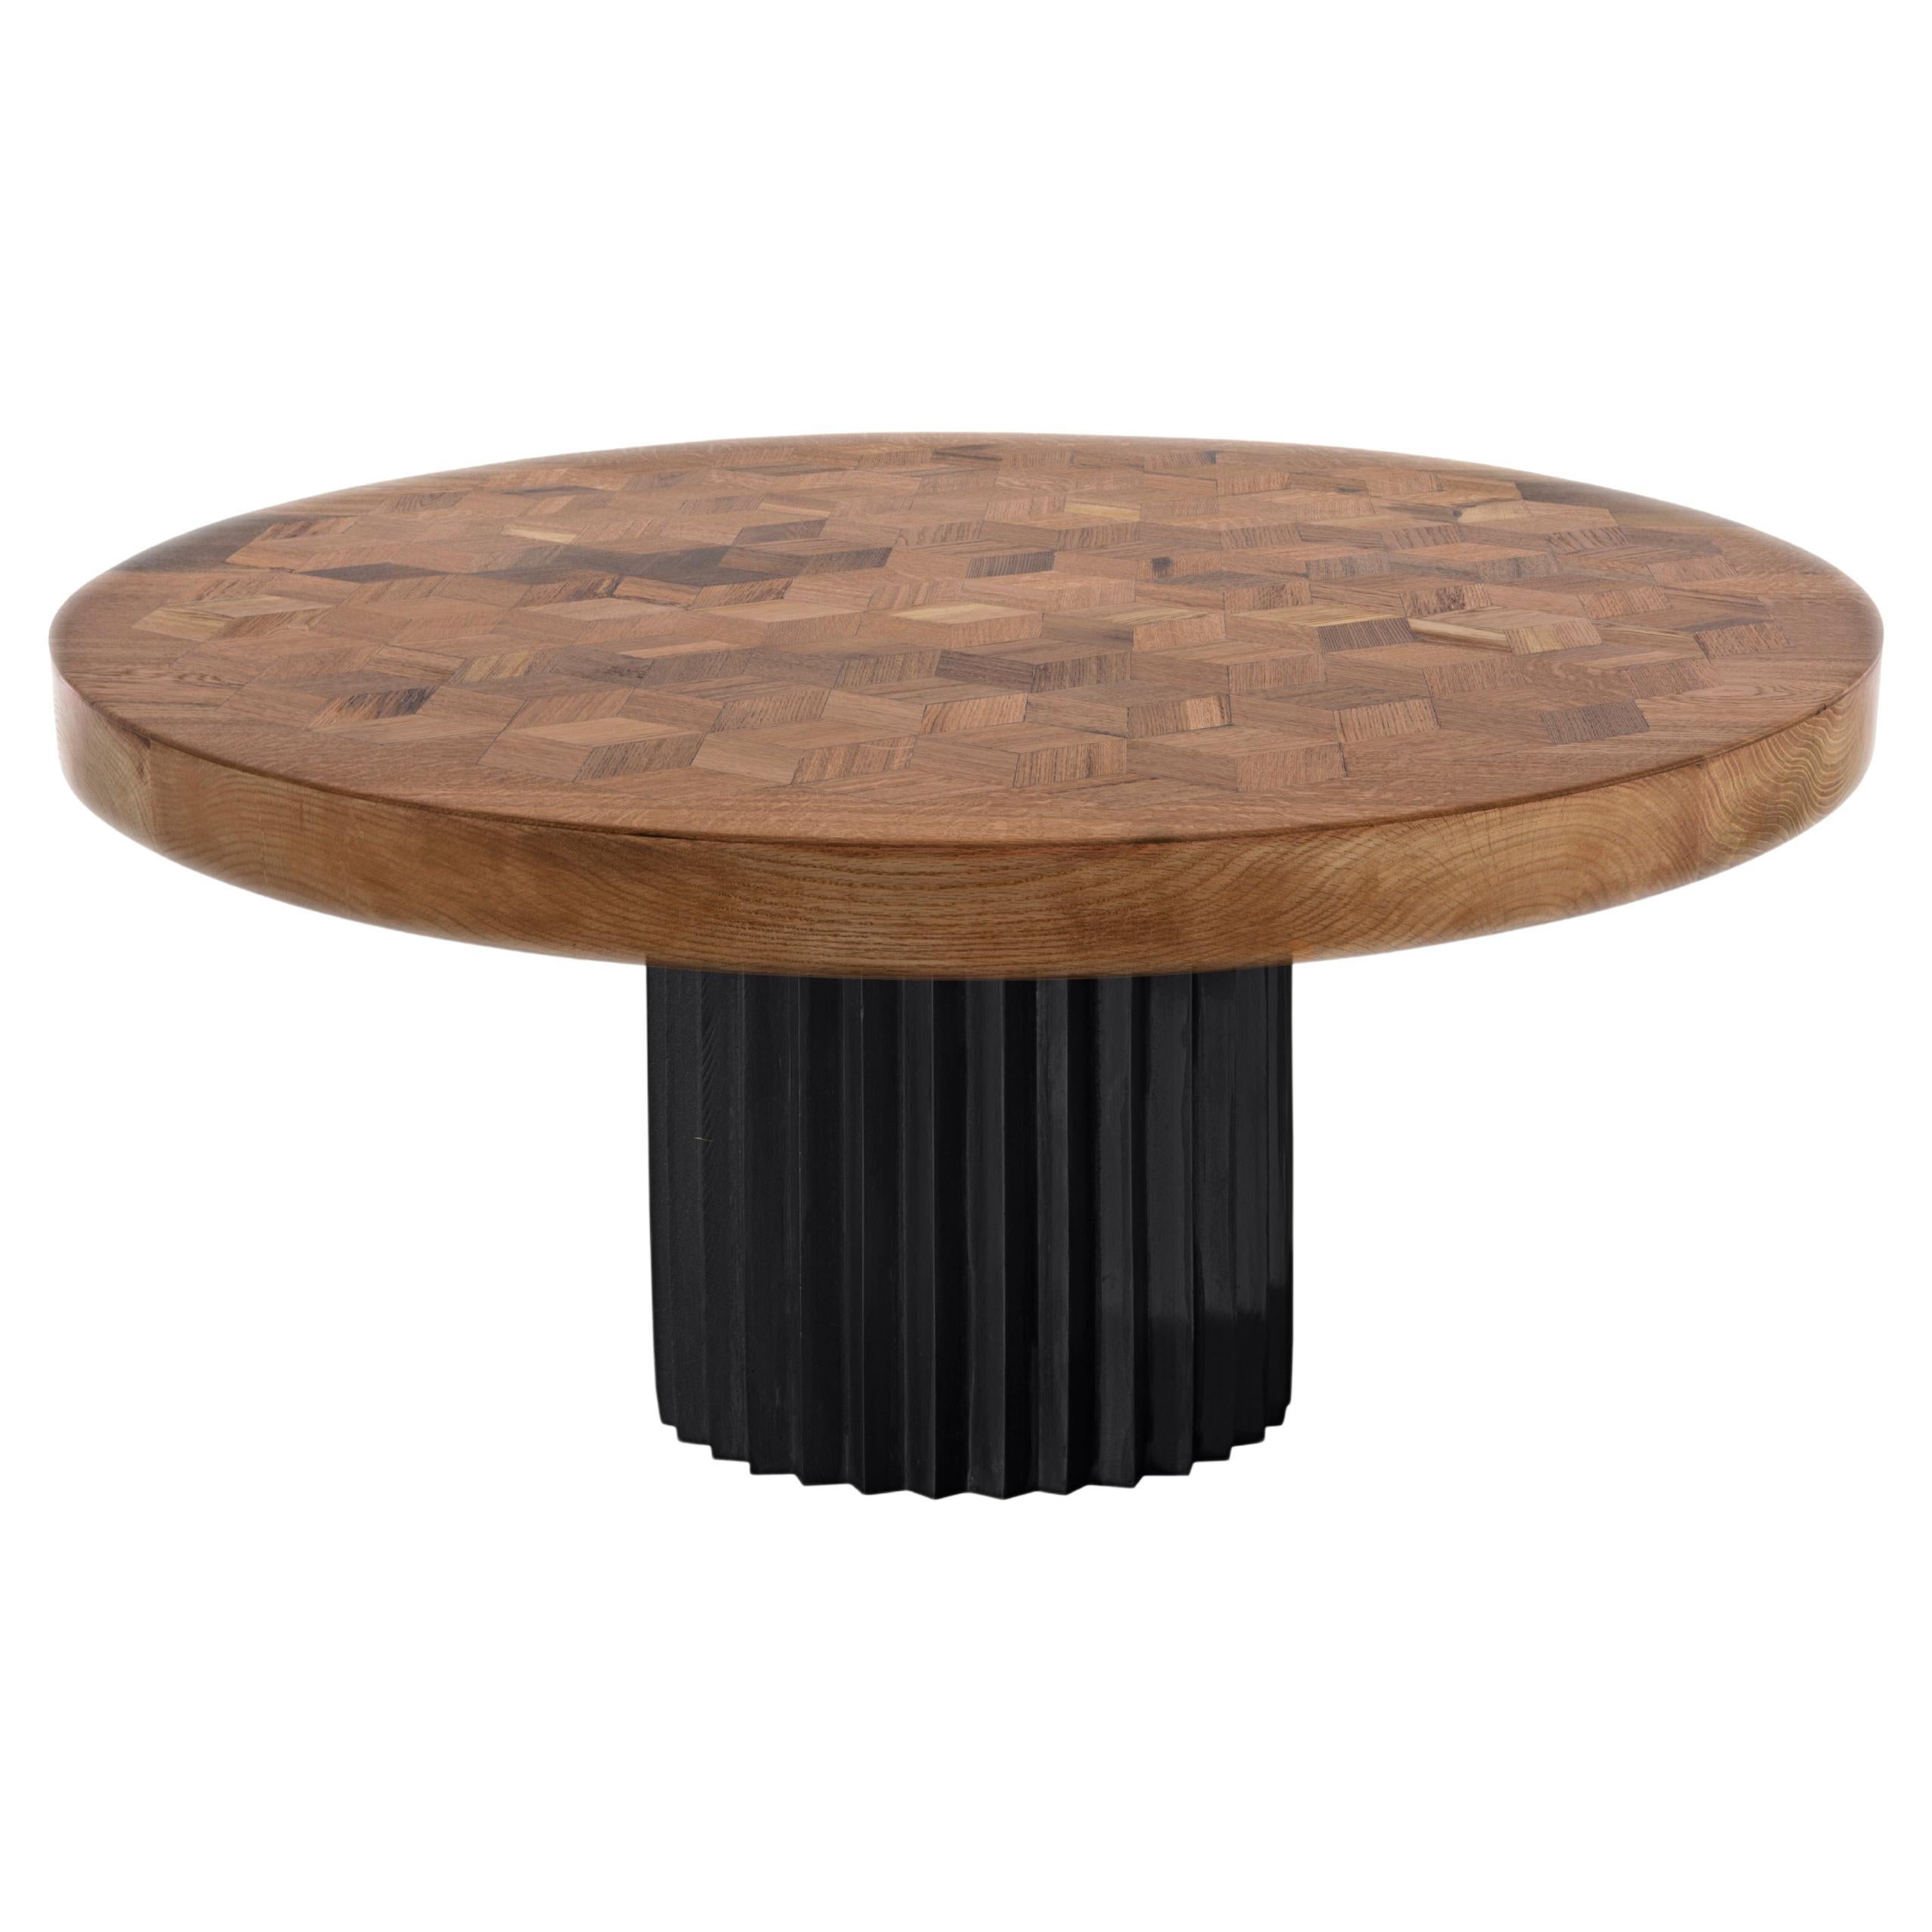 Doris Reclaimed Oak Round Dining Table by Fred and Juul For Sale